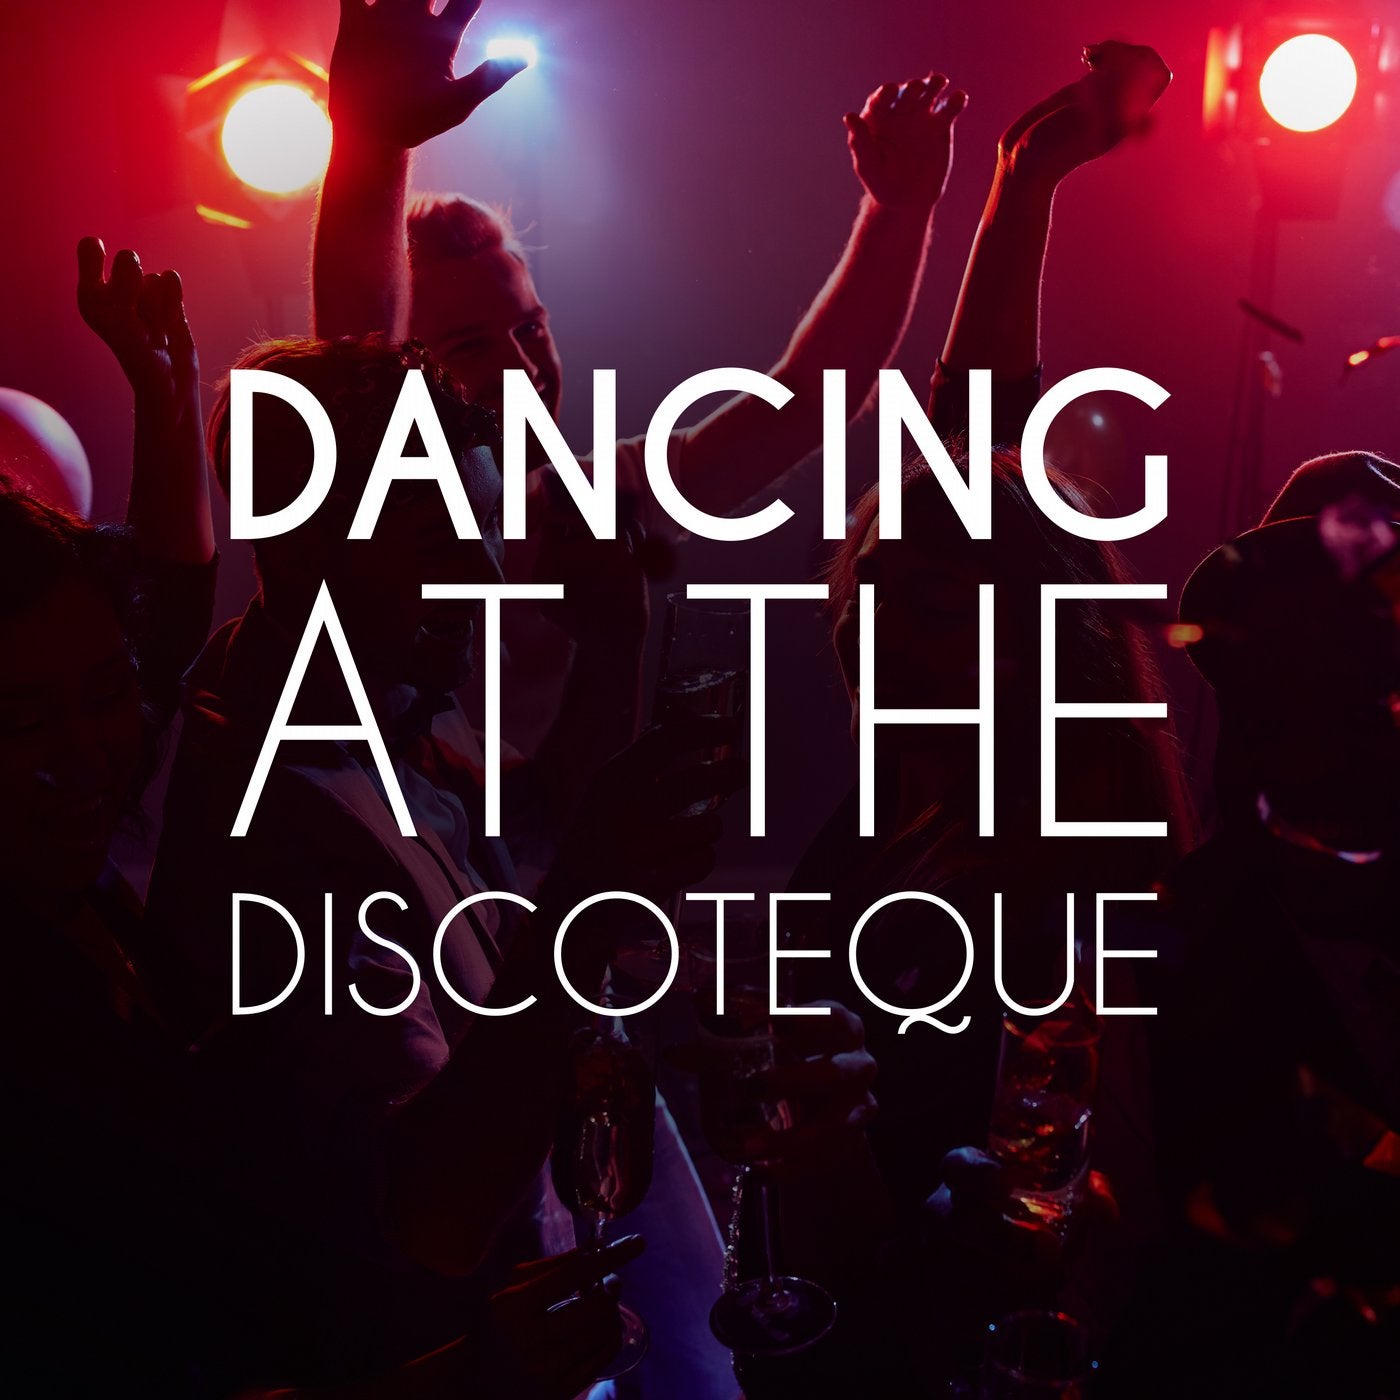 Dancing at the Discoteque